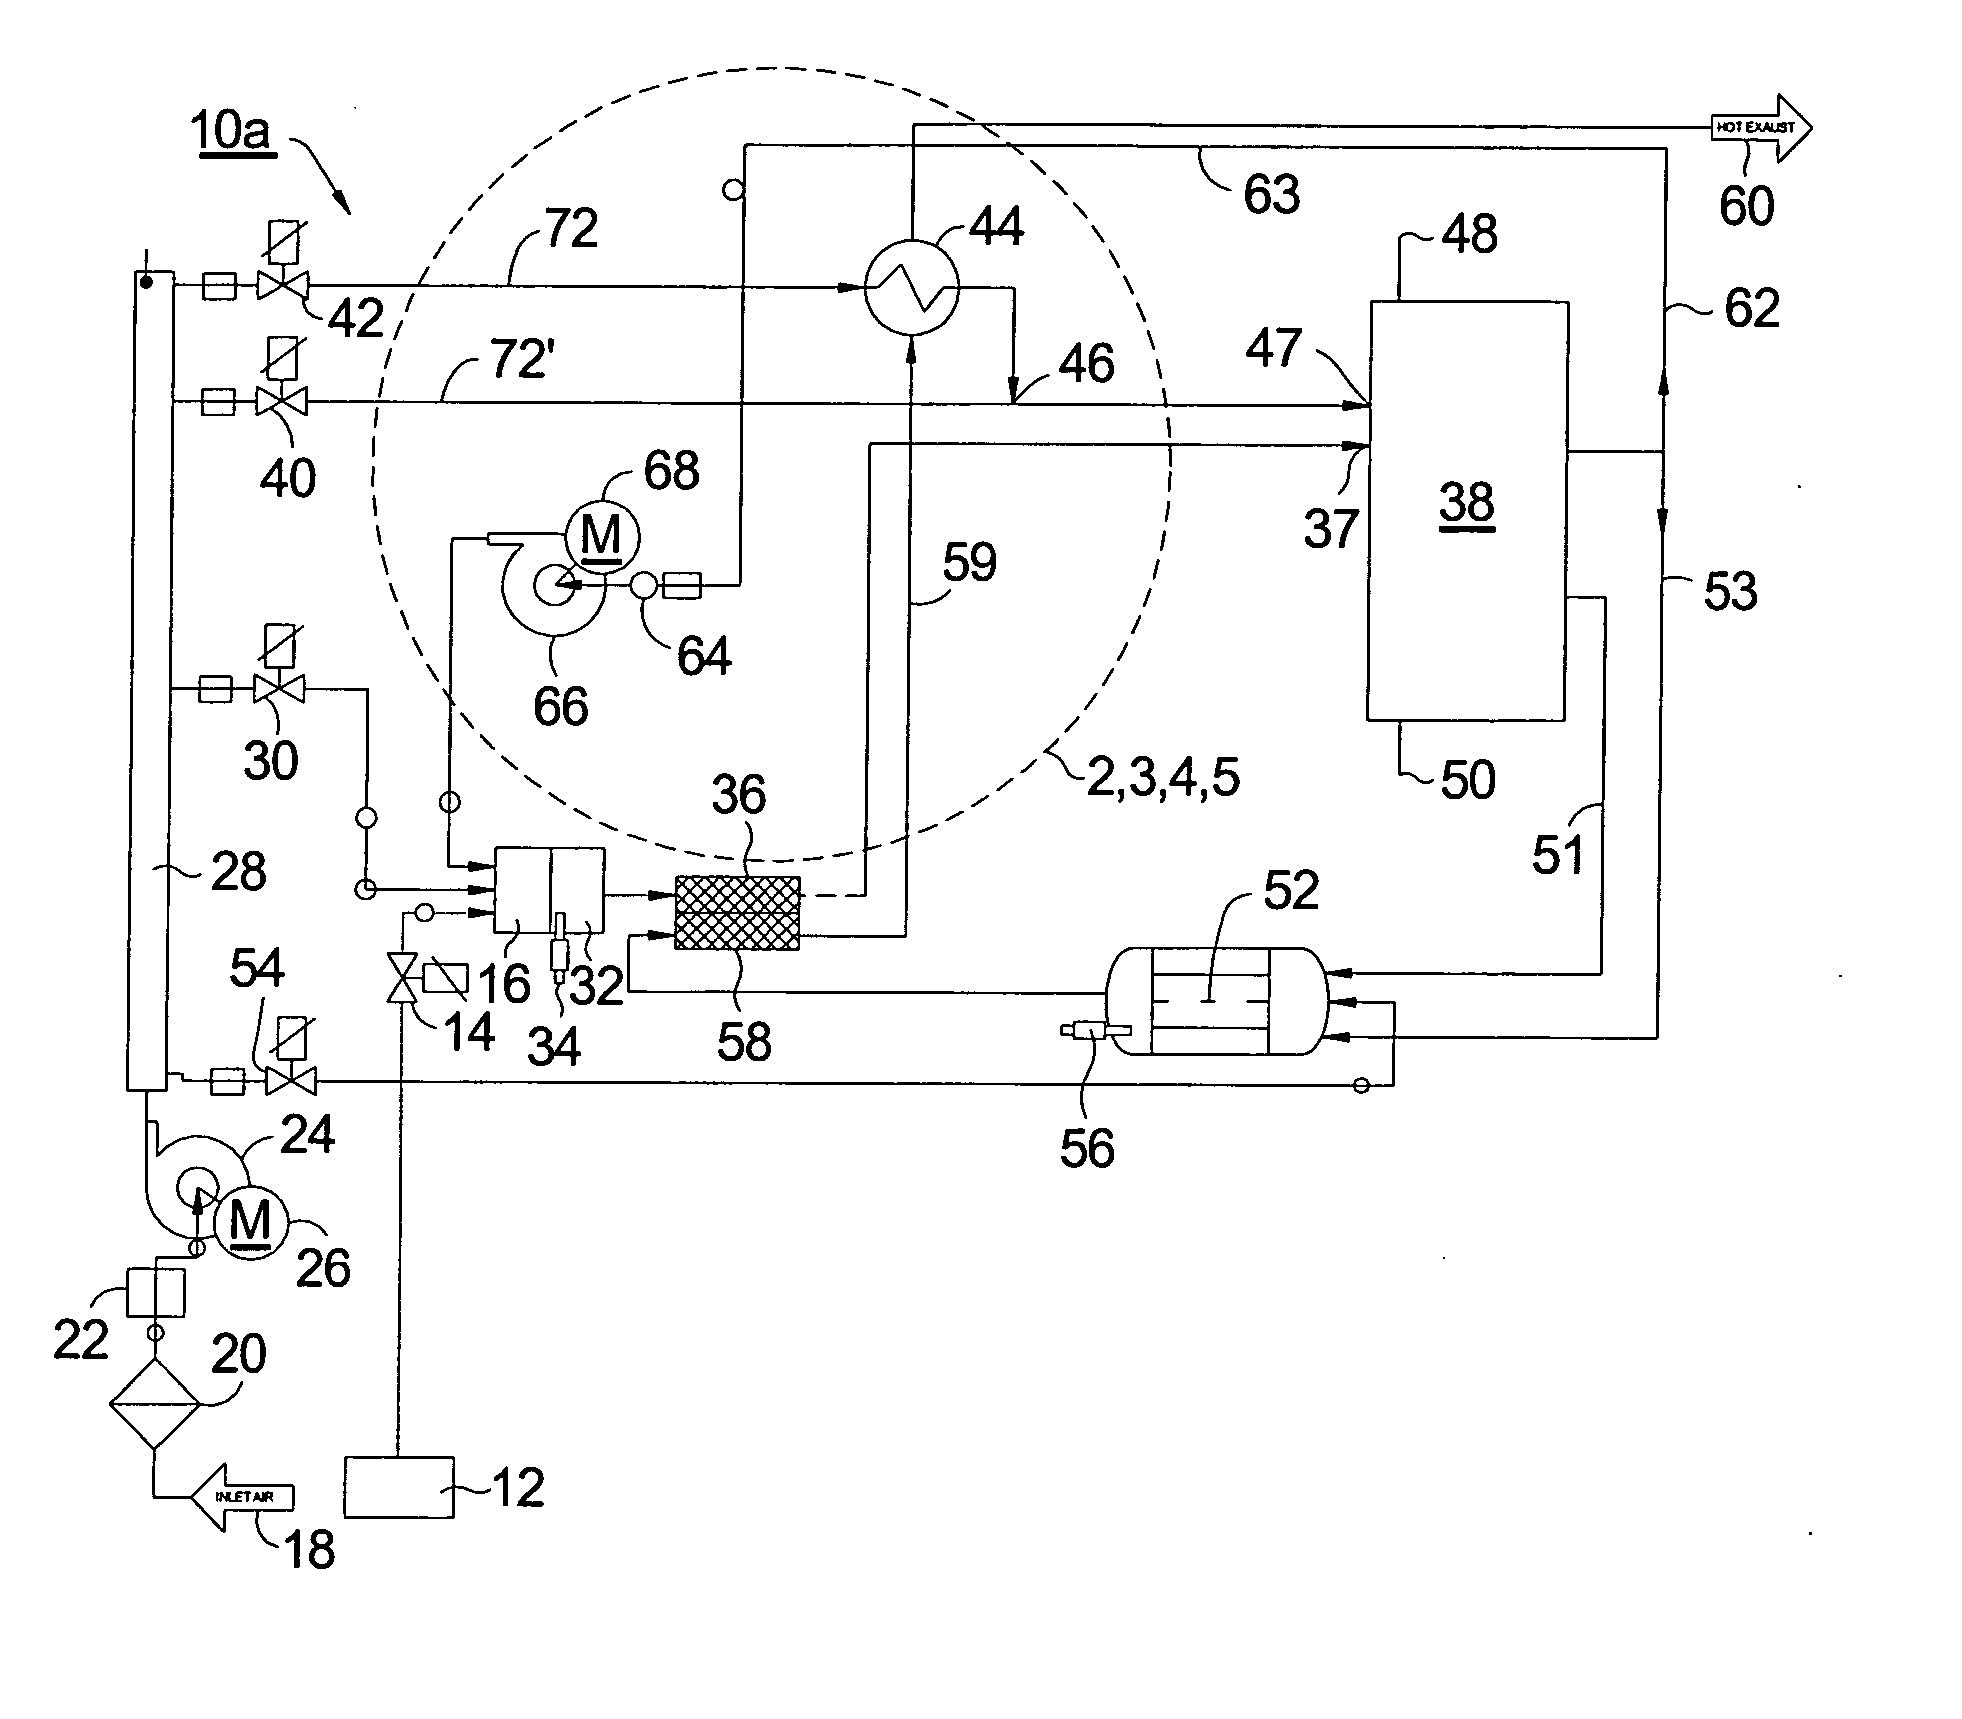 Anode tail gas recycle cooler and re-heater for a solid oxide fuel cell stack assembly